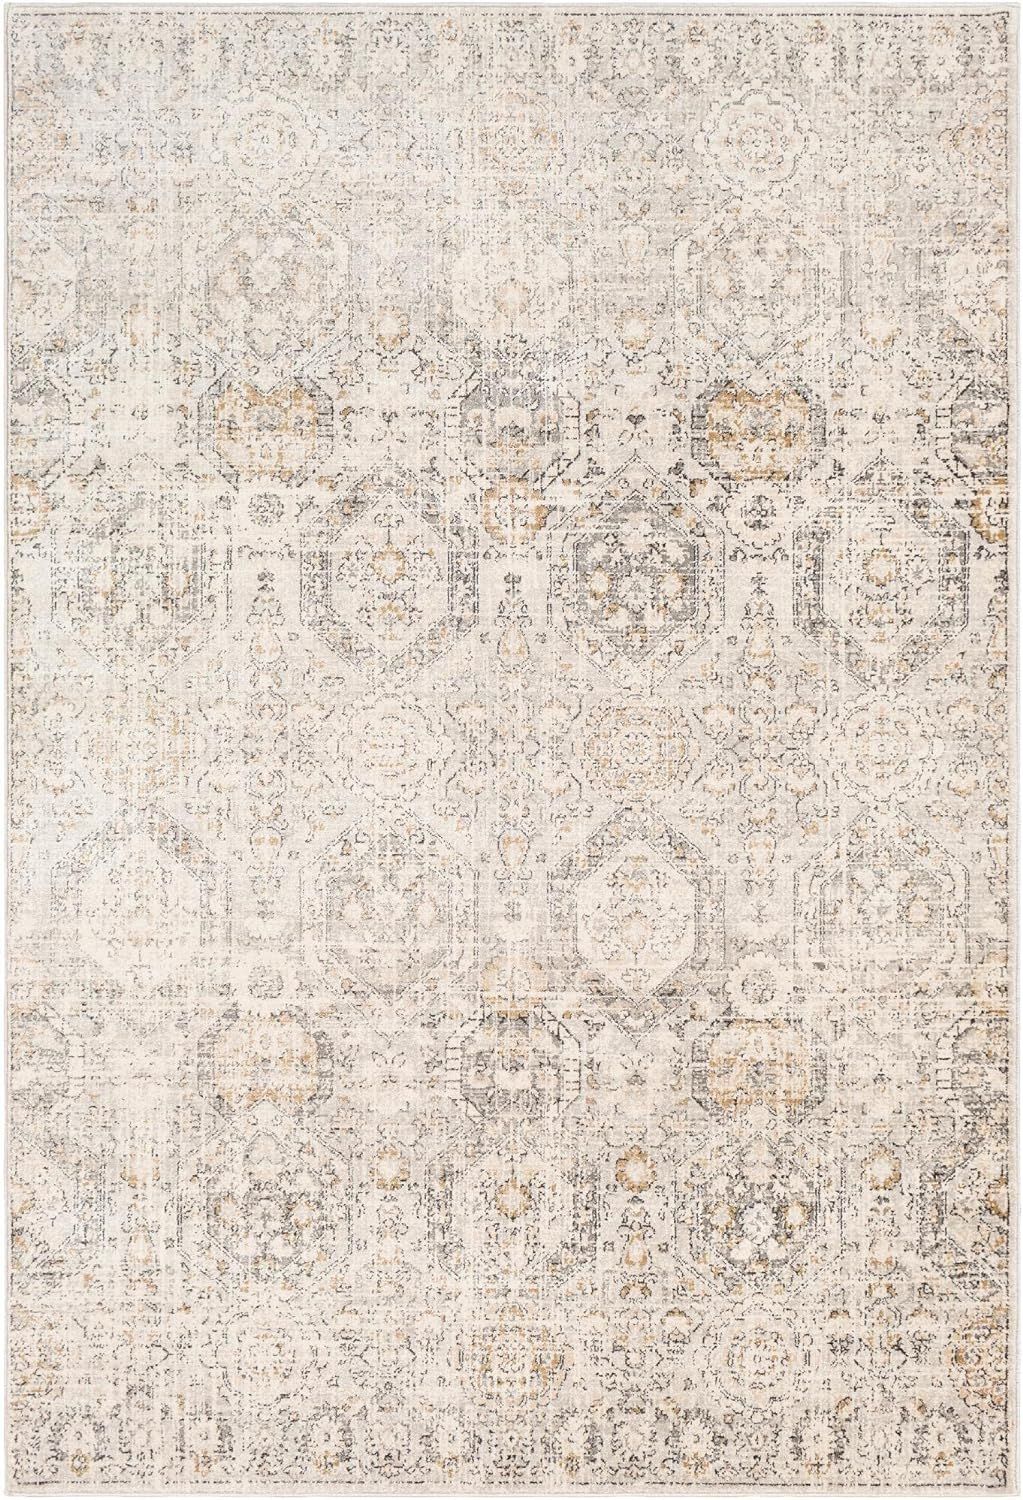 Mark&Day Area Rugs, 5x7 Geelbroek Traditional Tan/Ivory Area Rug, Beige Grey Black Carpet for Liv... | Amazon (US)